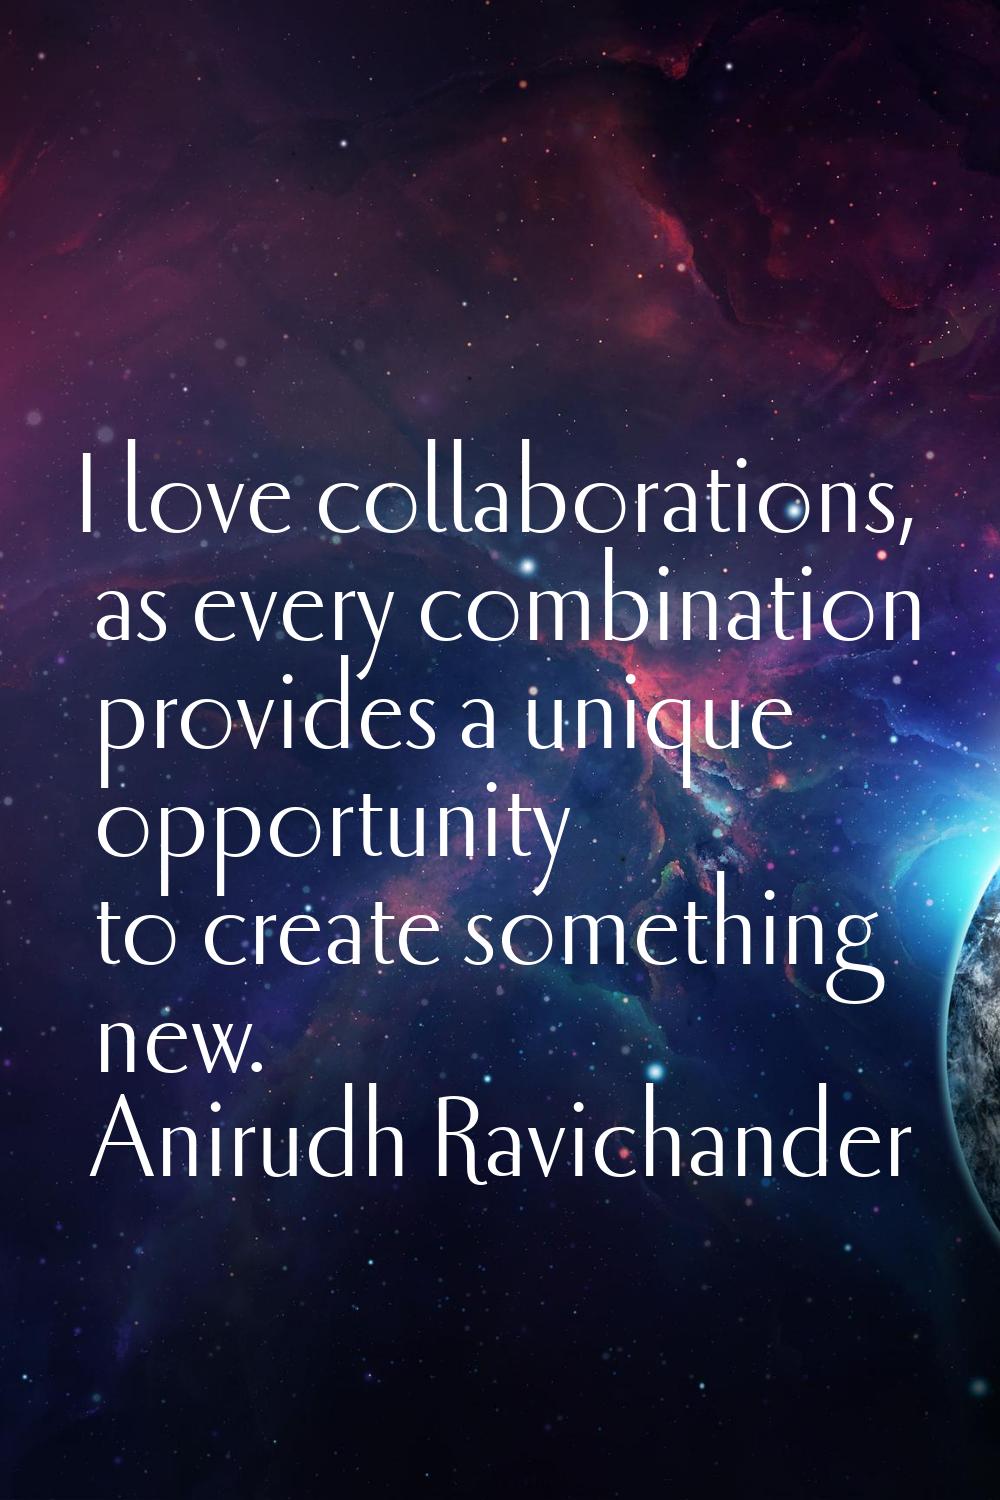 I love collaborations, as every combination provides a unique opportunity to create something new.